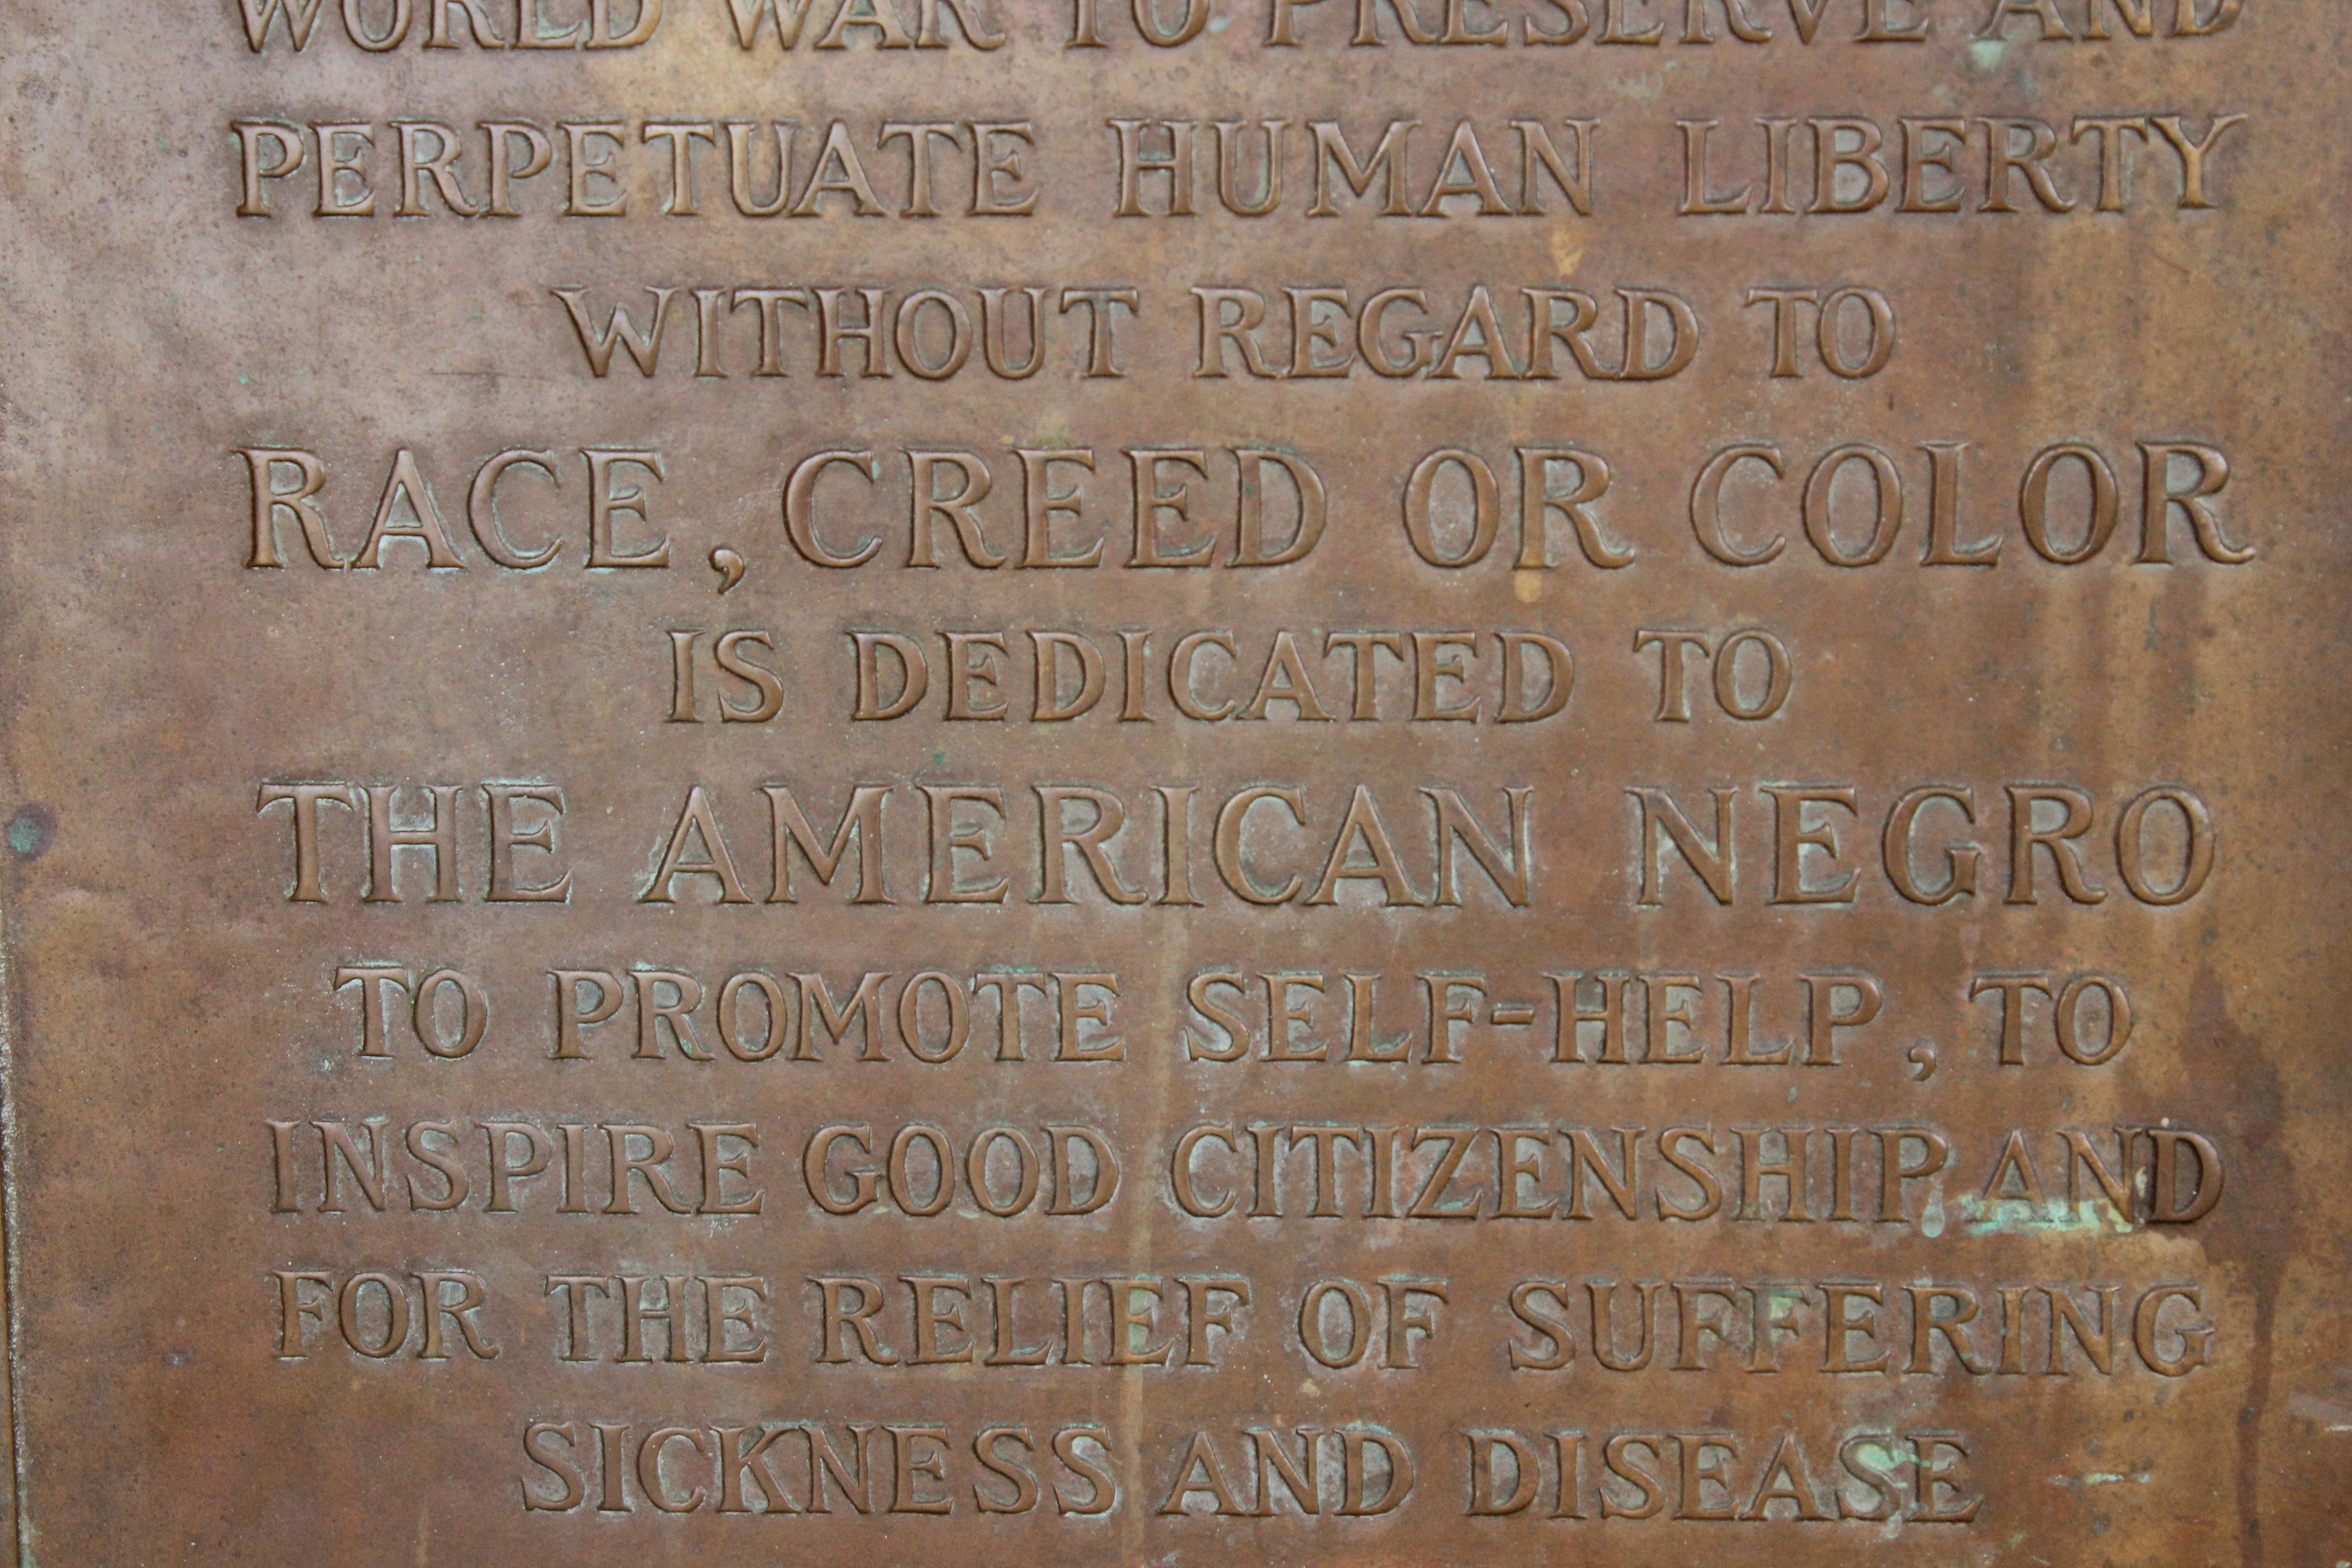 A Tiffany & Co. copper plaque made for the Houston Negro Hospital in 1926 dedicated to the memory of lieutenant John Halm Cullinan. 

The Houston Negro Hospital was created in 1926 when the earlier black Union-Jeremiah Hospital was no longer